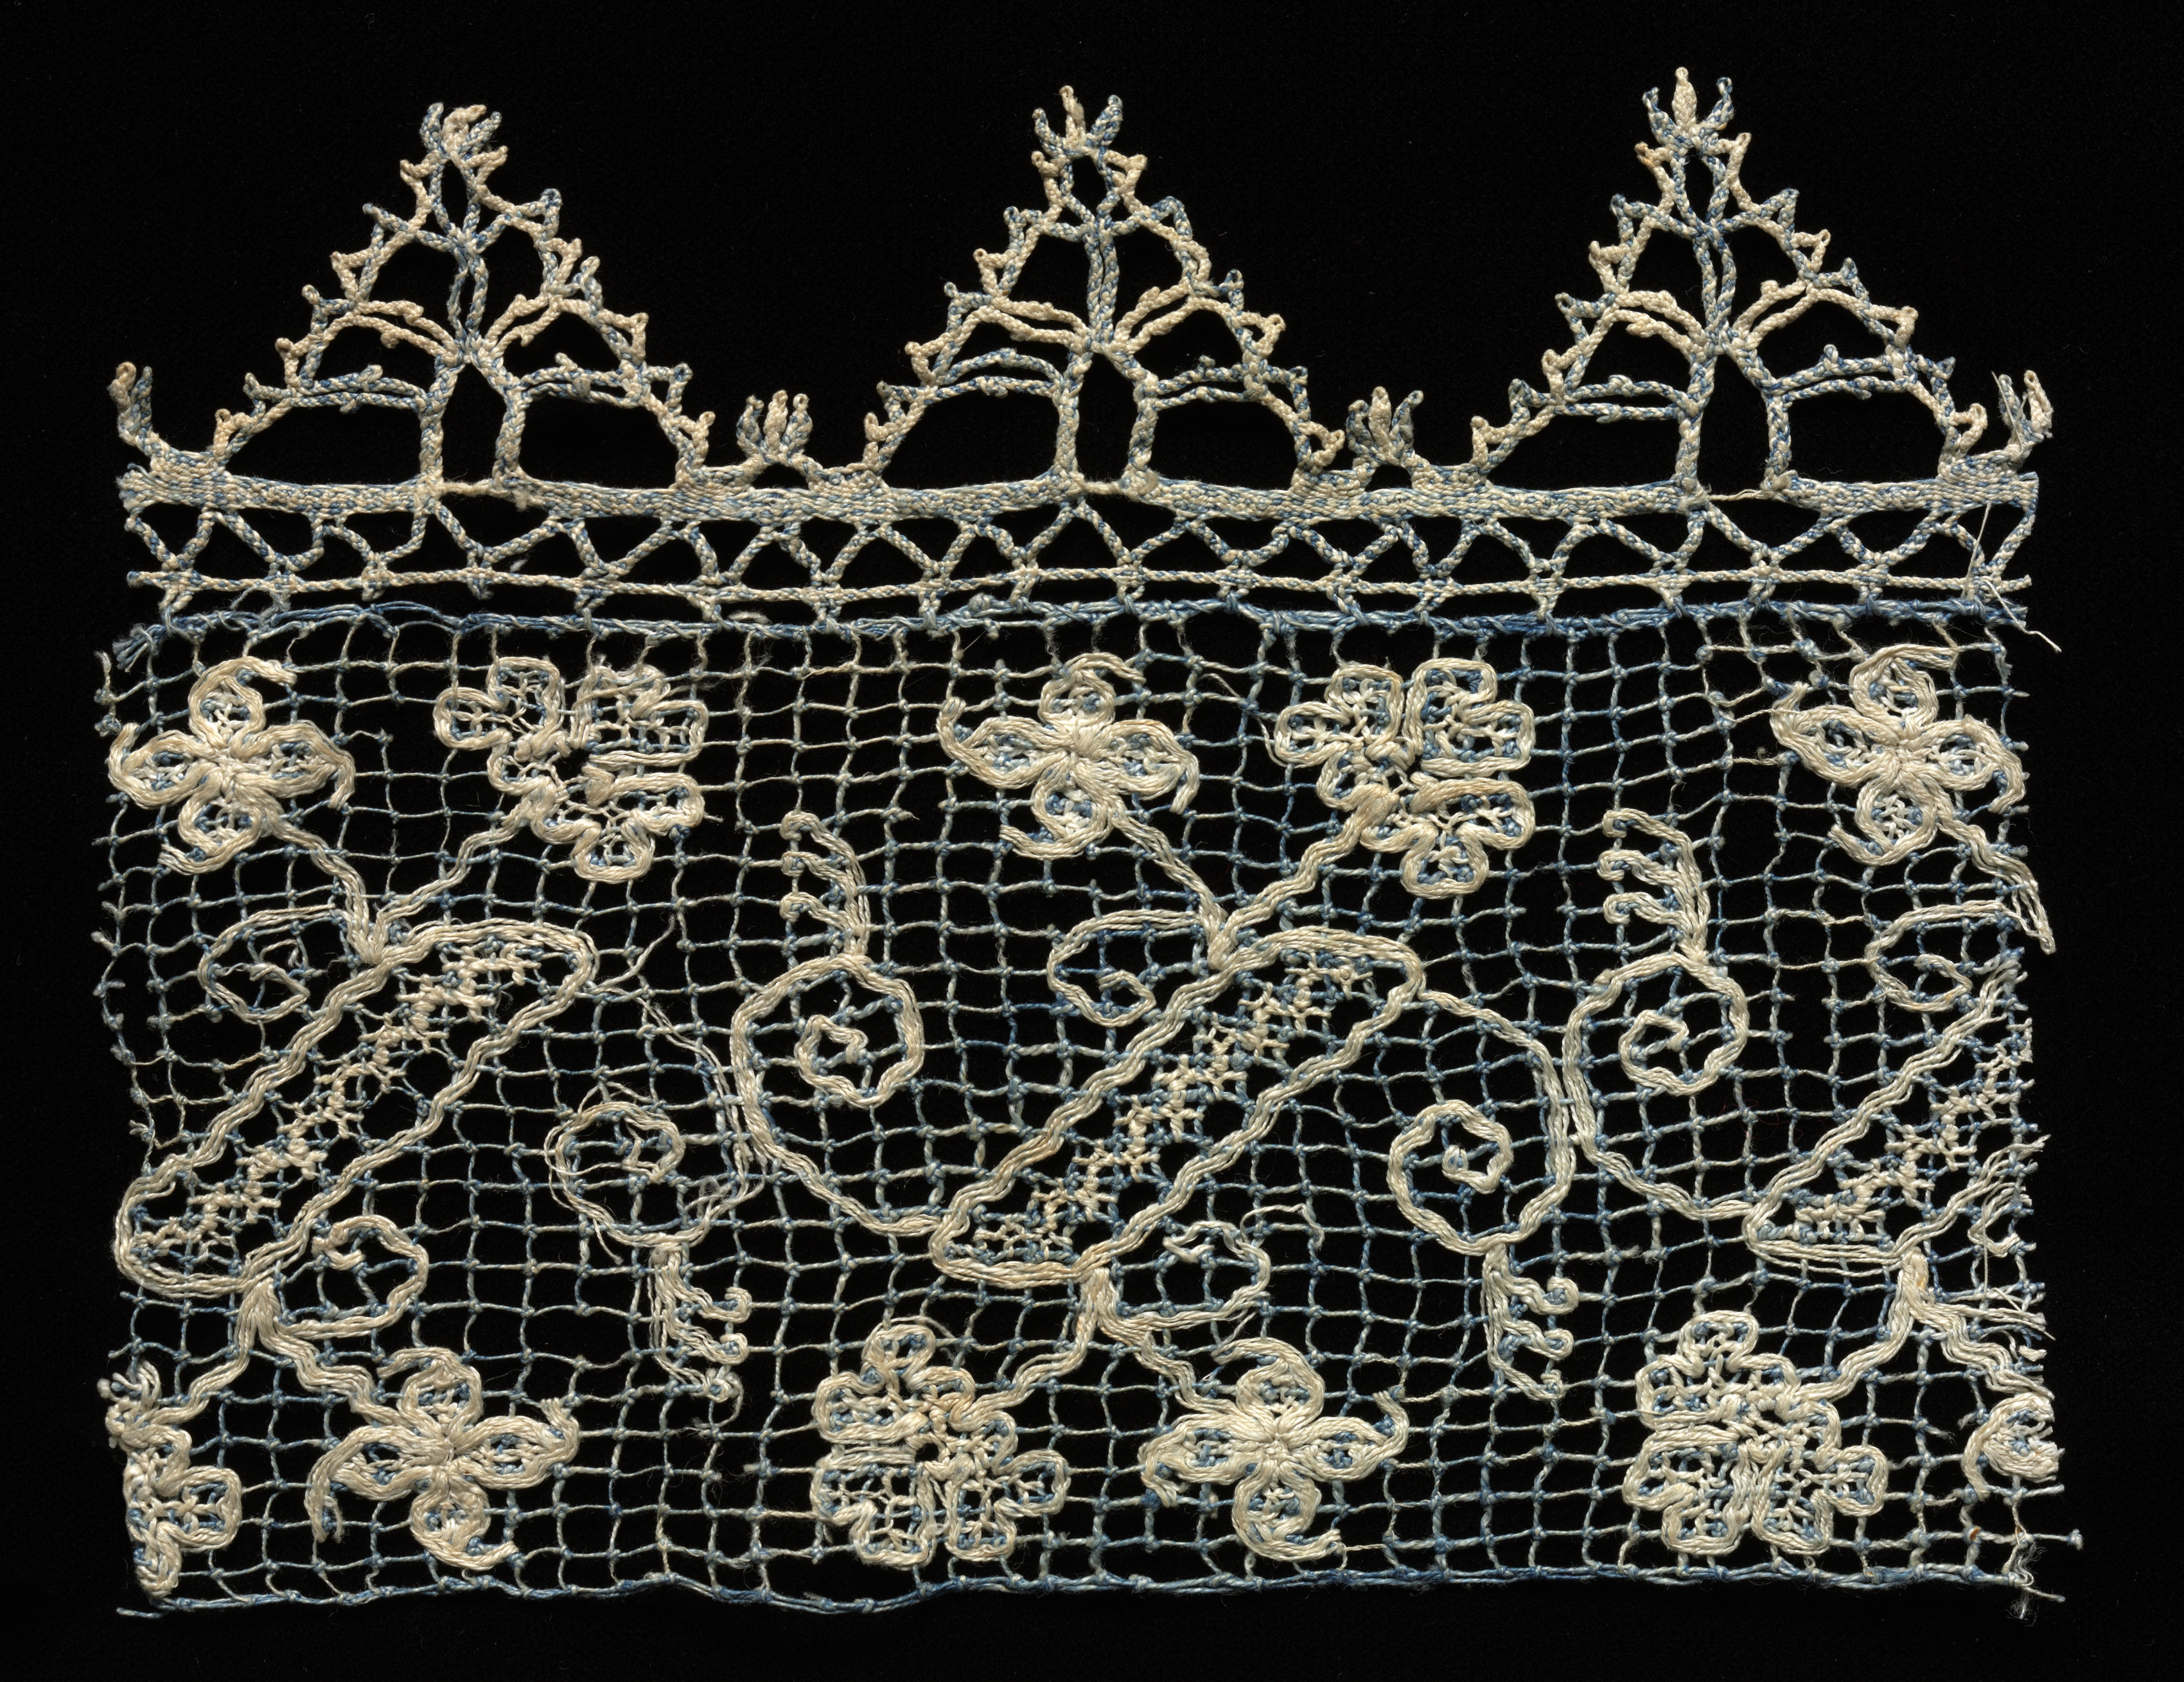 Fragment of a Border with Vines and Floral Motifs